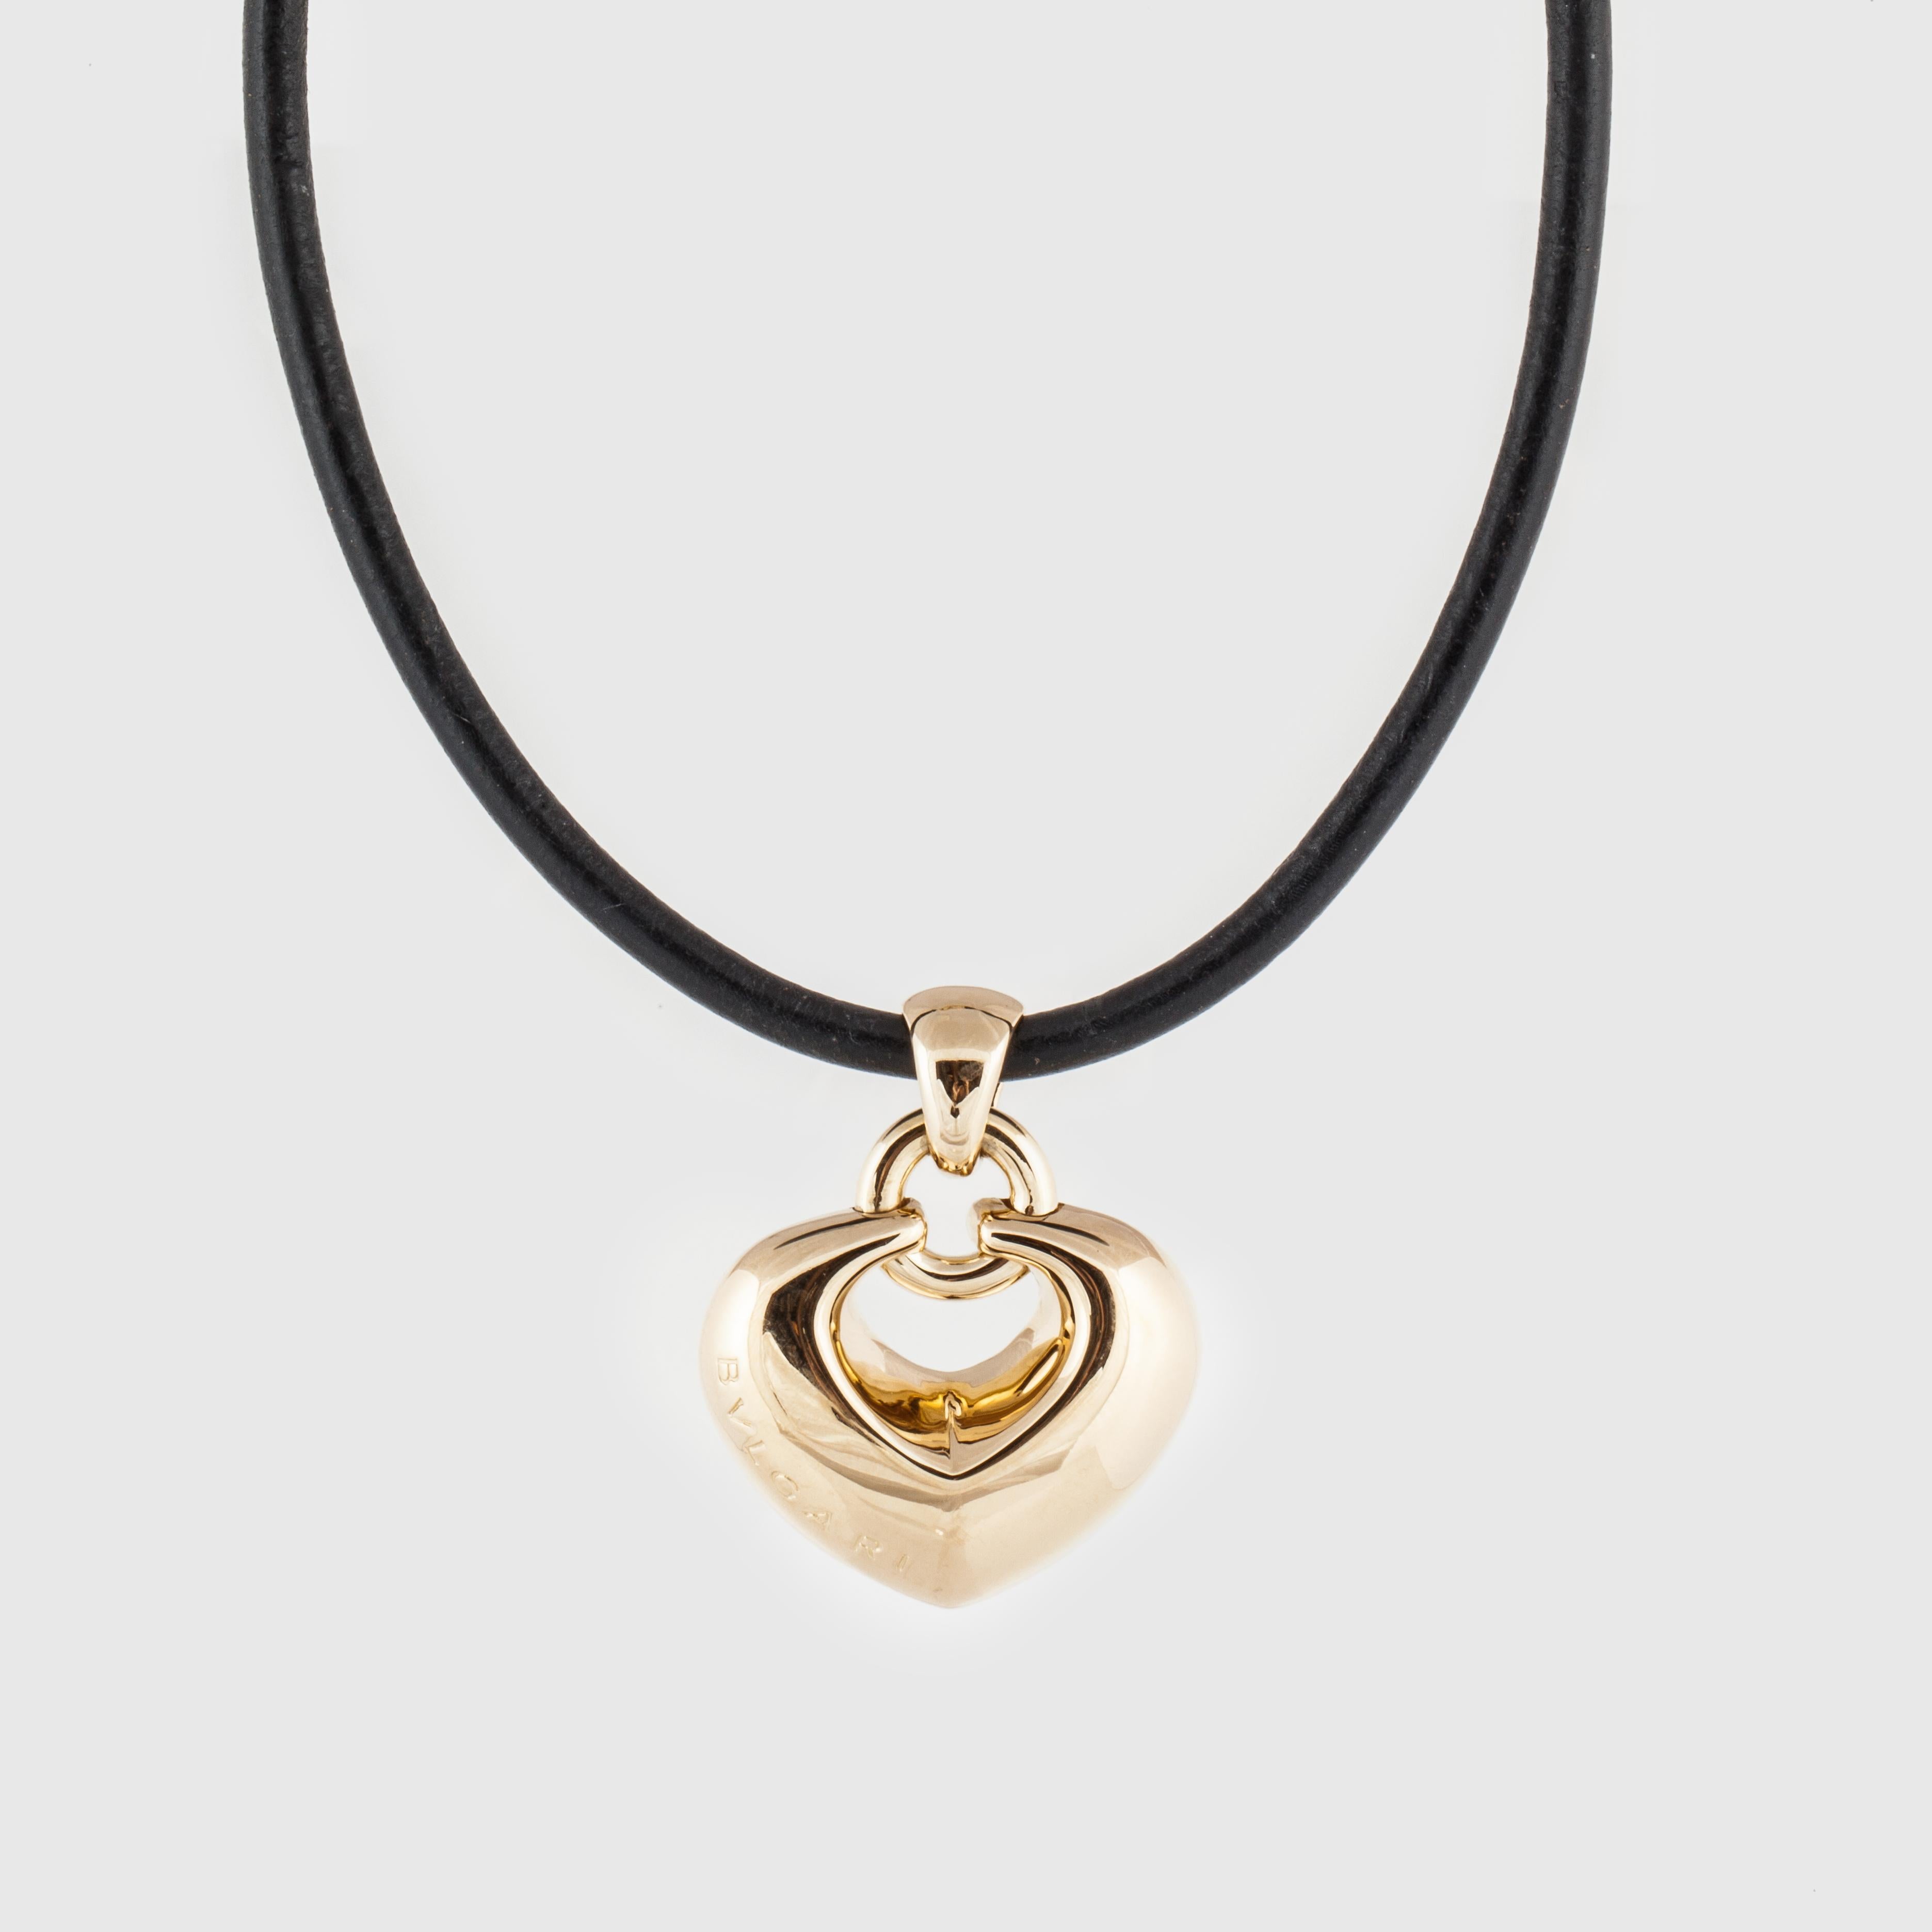 Bulgari necklace features an 18K yellow gold puffy heart on leather cord.  The front of the heart is marked 